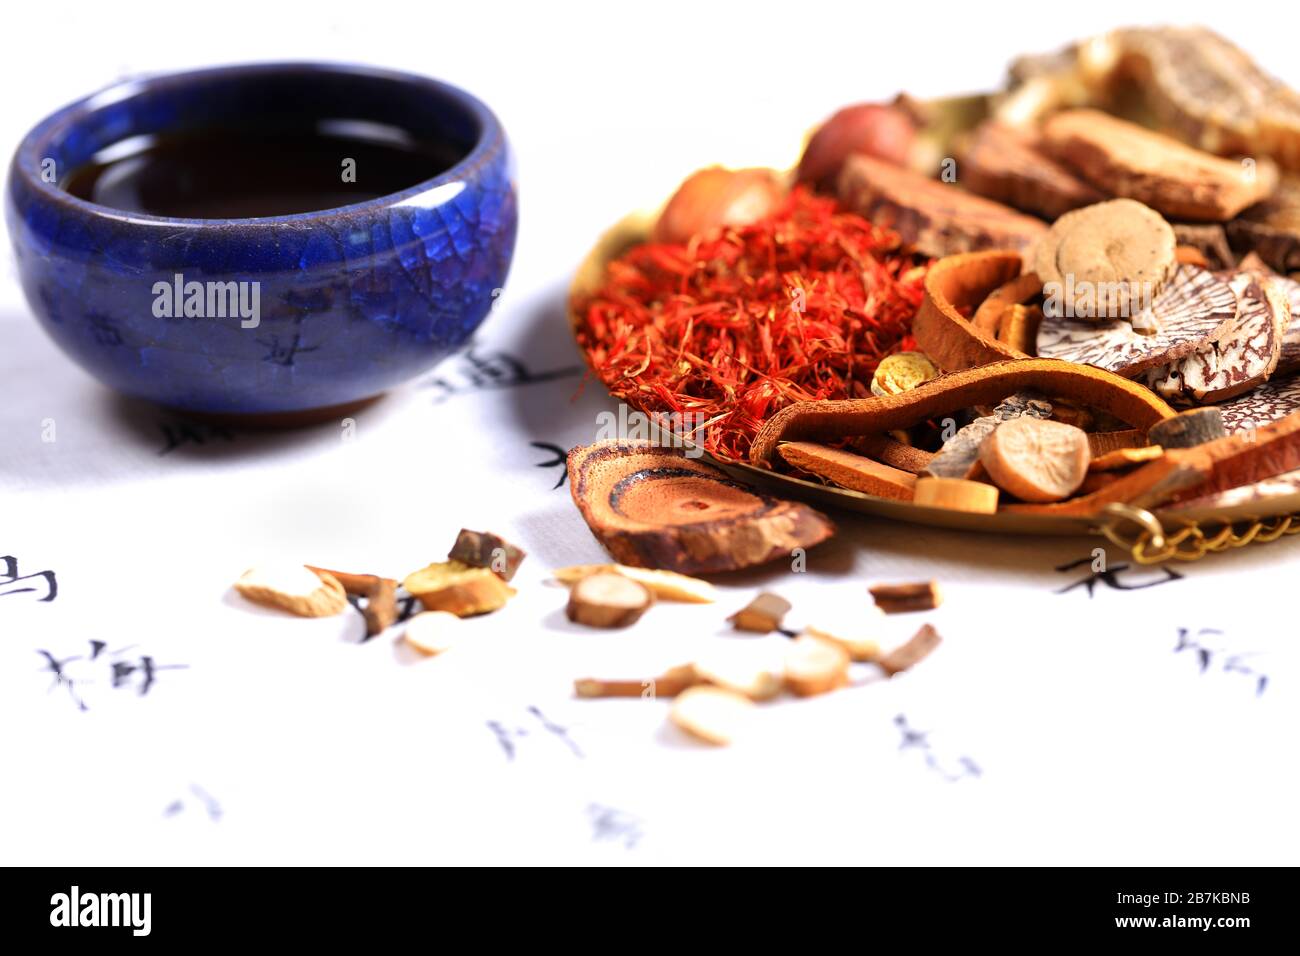 Chinese herbal medicine, Medical concept Stock Photo